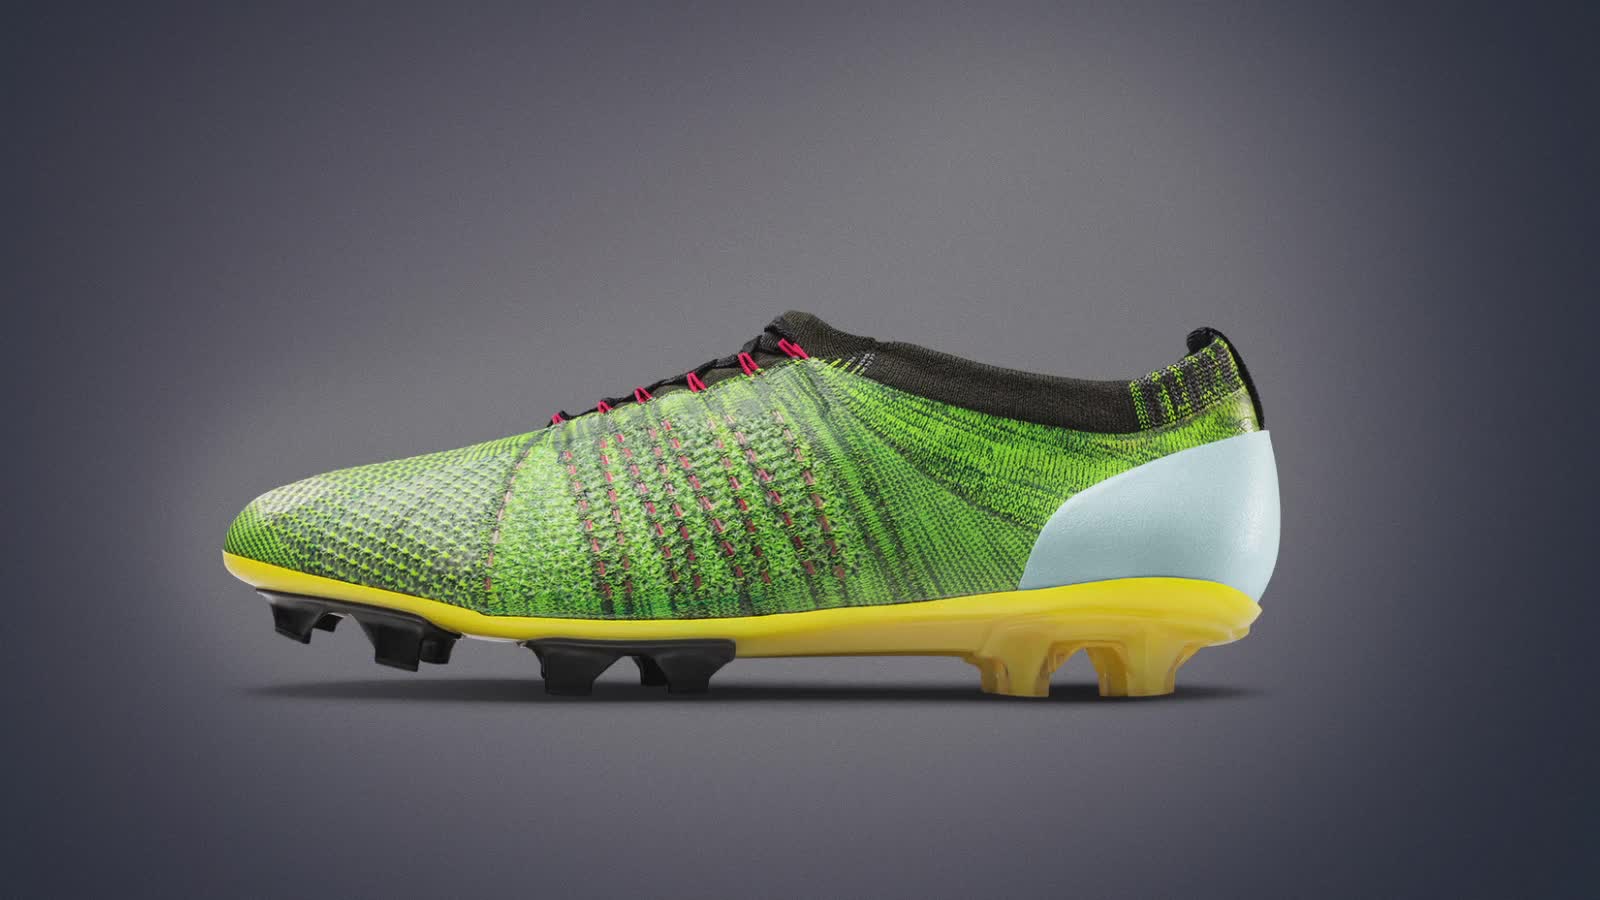 Trends For > Nike Soccer Cleats Wallpaper 2014